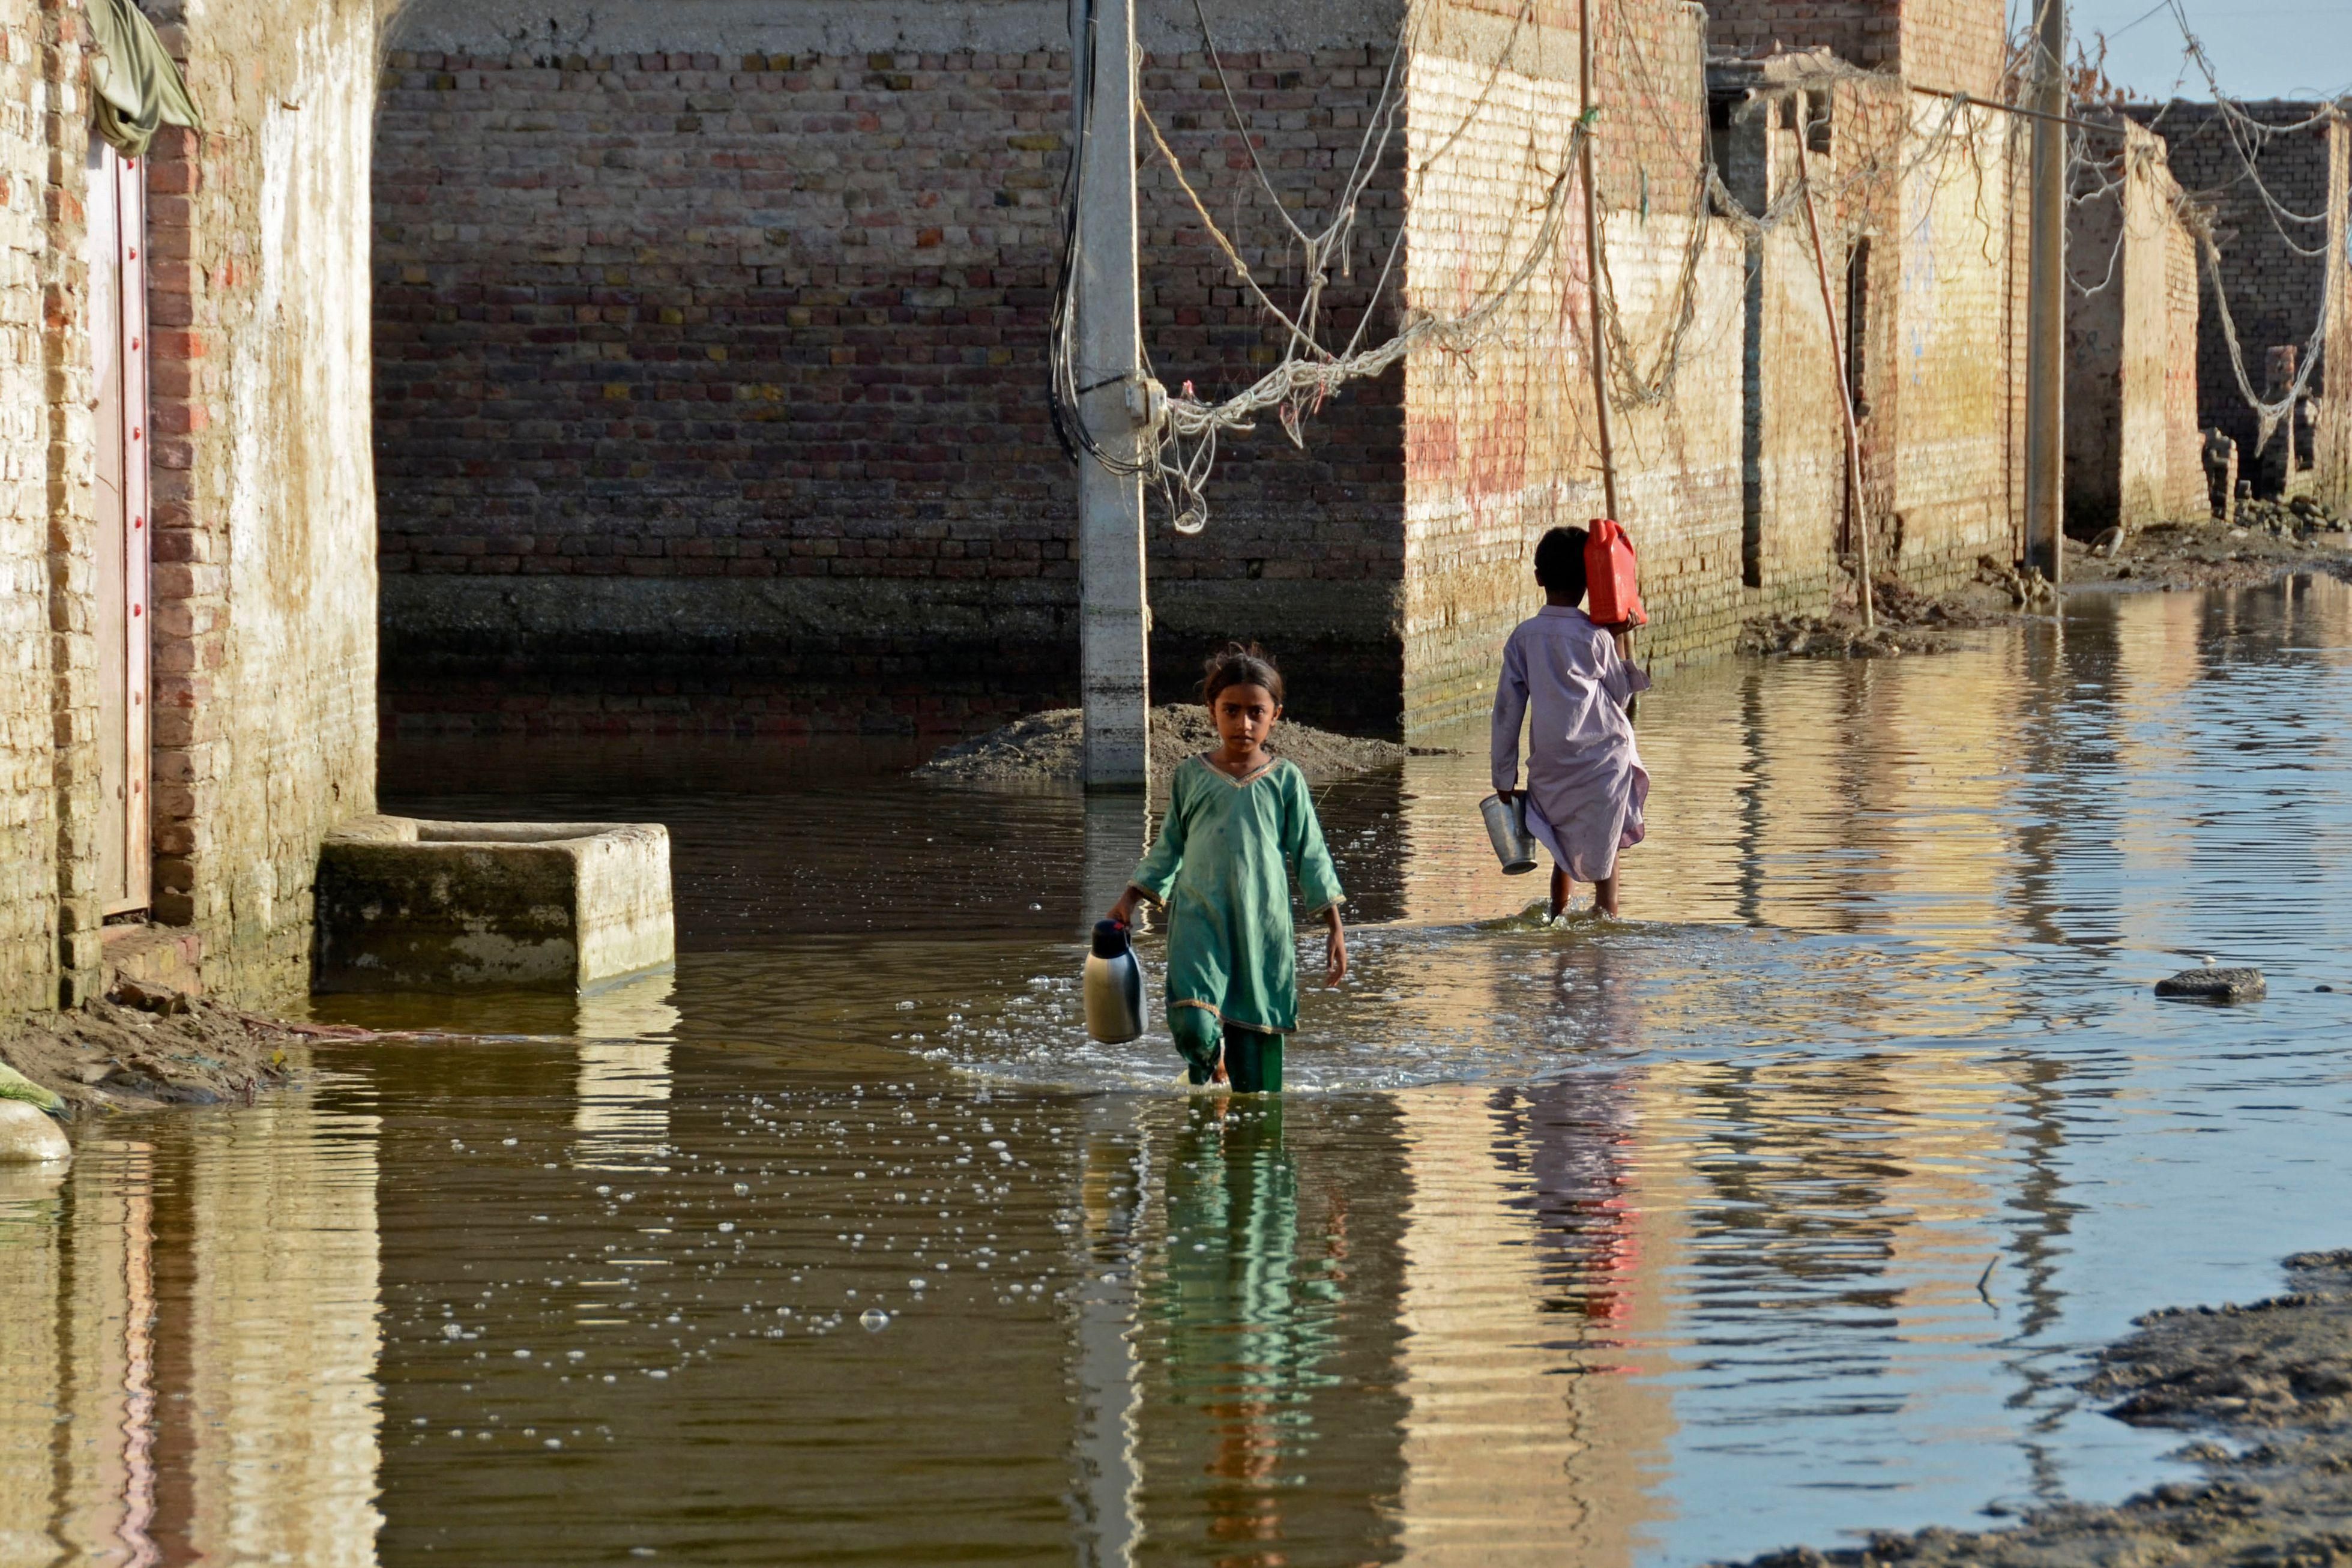 Children wade through a flooded street in the Jaffarabad district of Pakistan's Balochistan province on October 4, 2022.